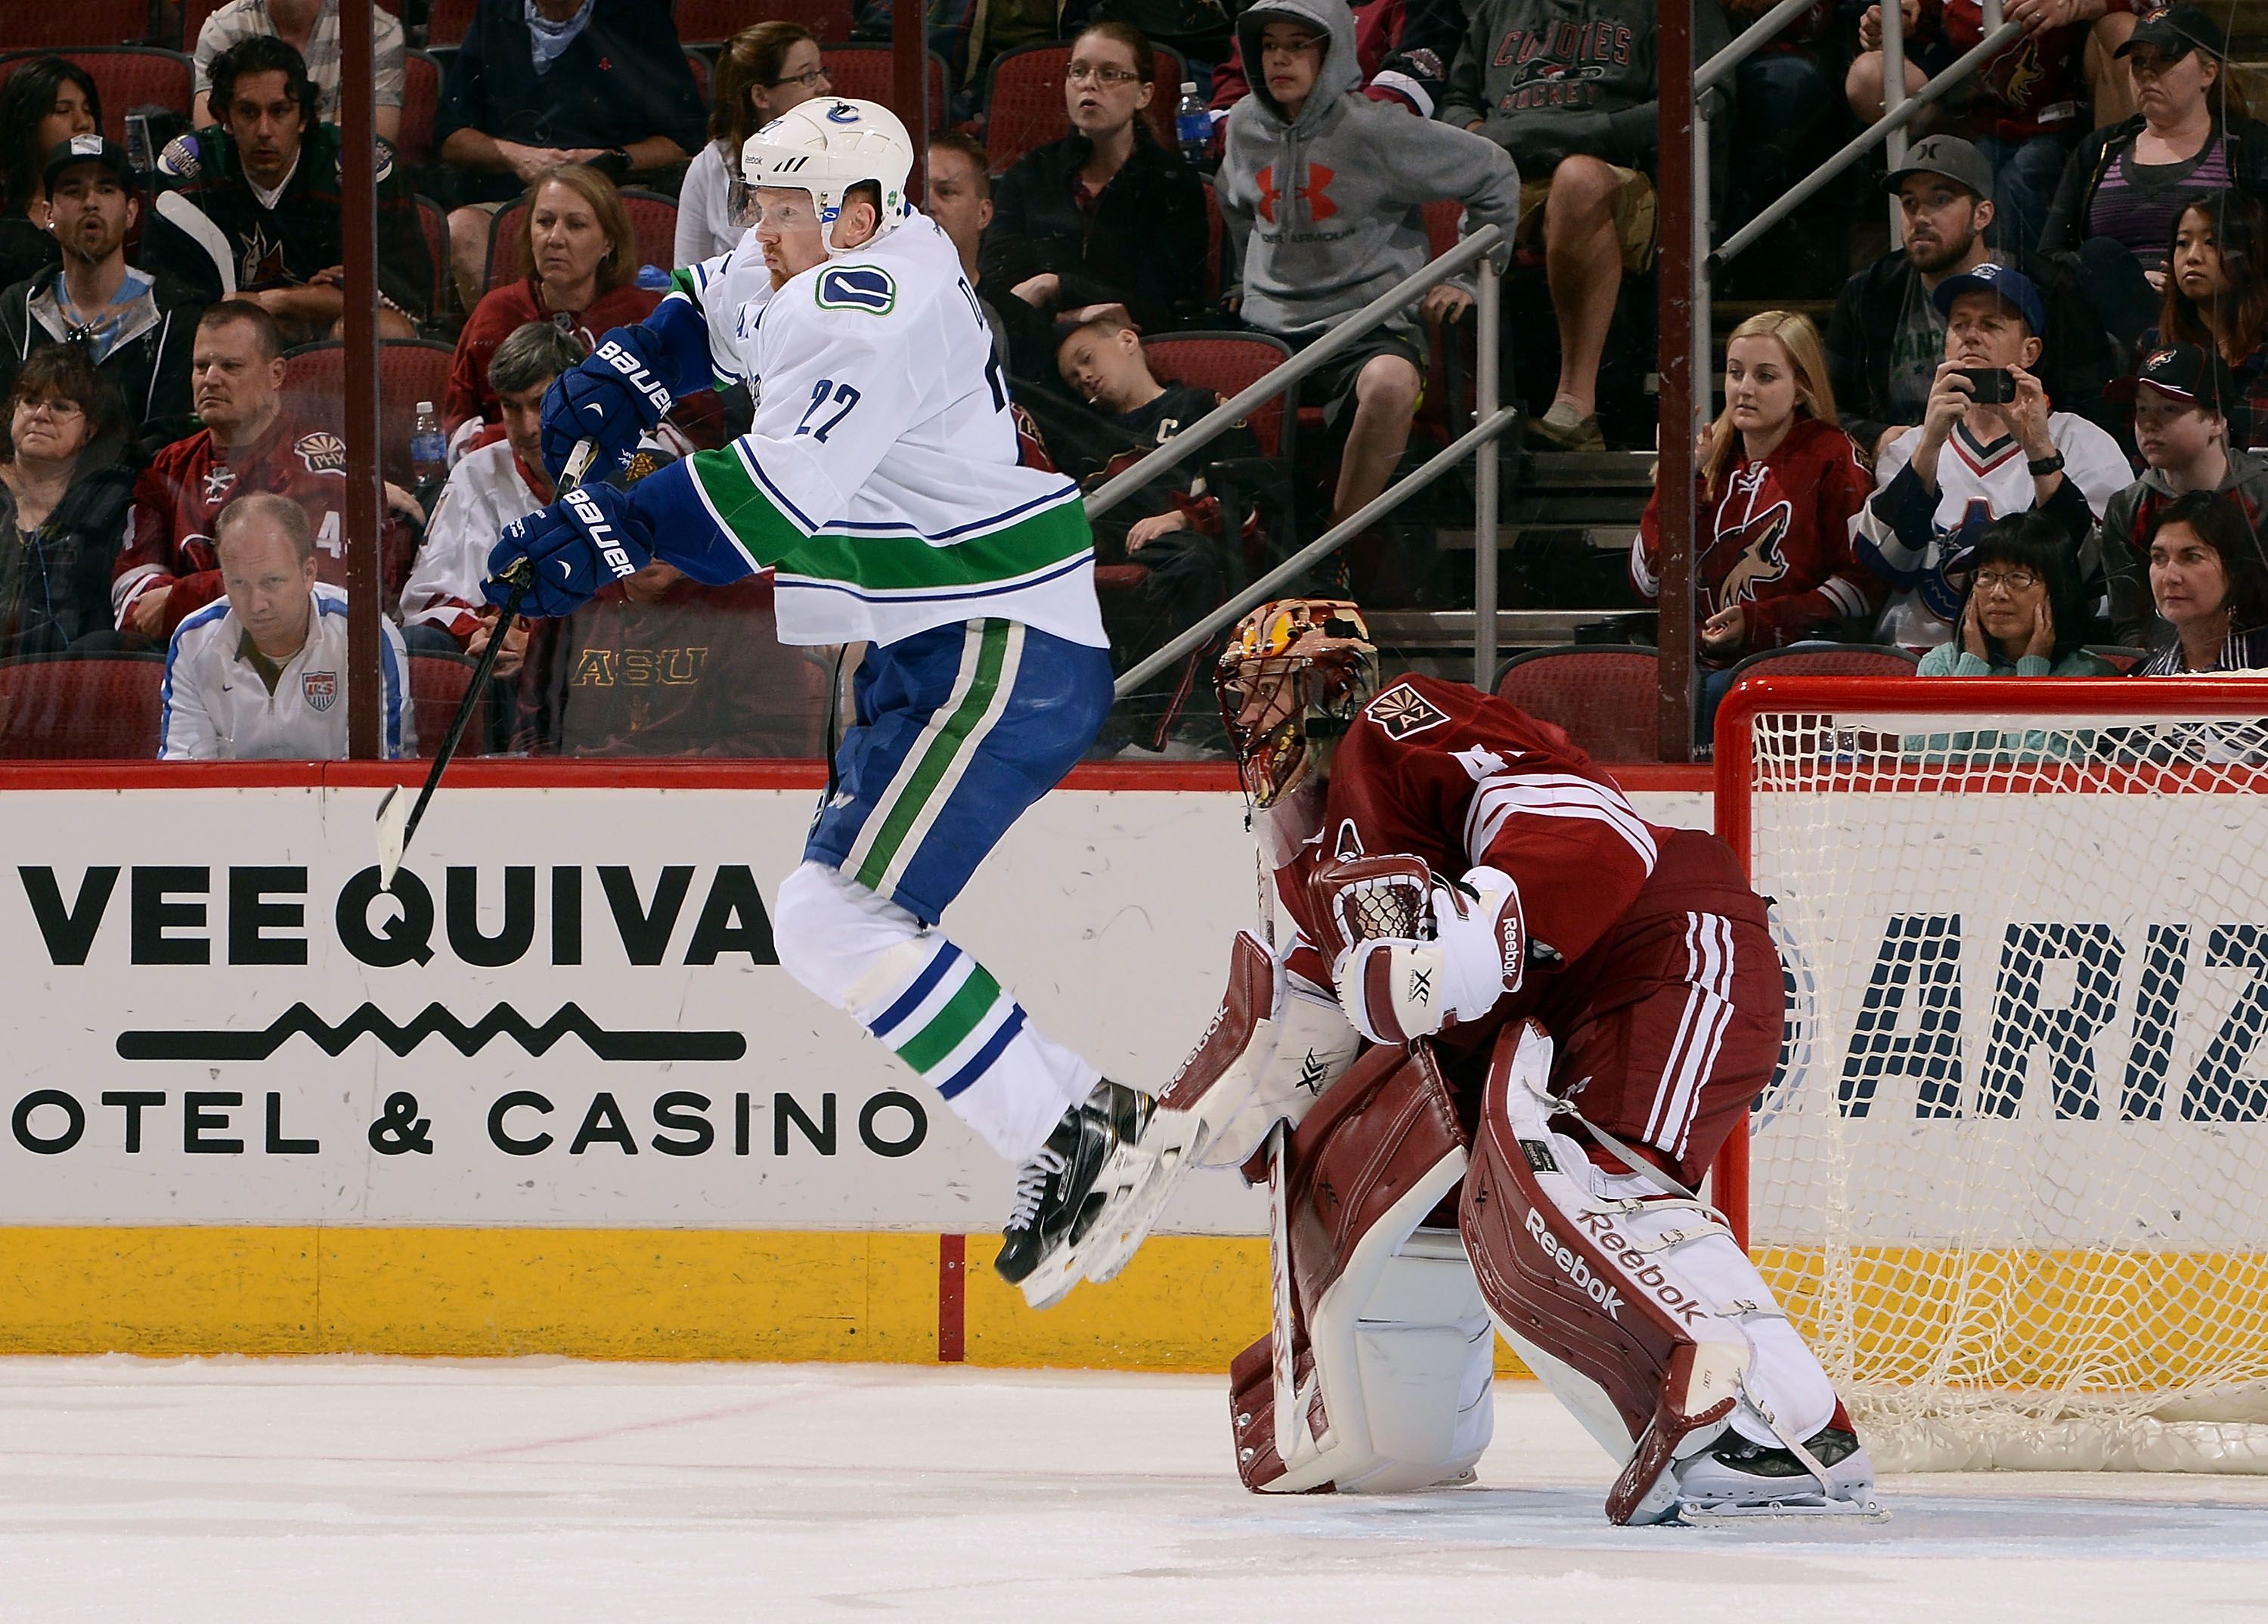 GLENDALE, AZ - MARCH 22:  Daniel Sedin #22 of the Vancouver Canucks leaps to re-direct the puck in front of goaltender Mike Smith #41 of the Arizona Coyotes during the third period at Gila River Arena on March 22, 2015 in Glendale, Arizona.  (Photo by Norm Hall/NHLI via Getty Images)